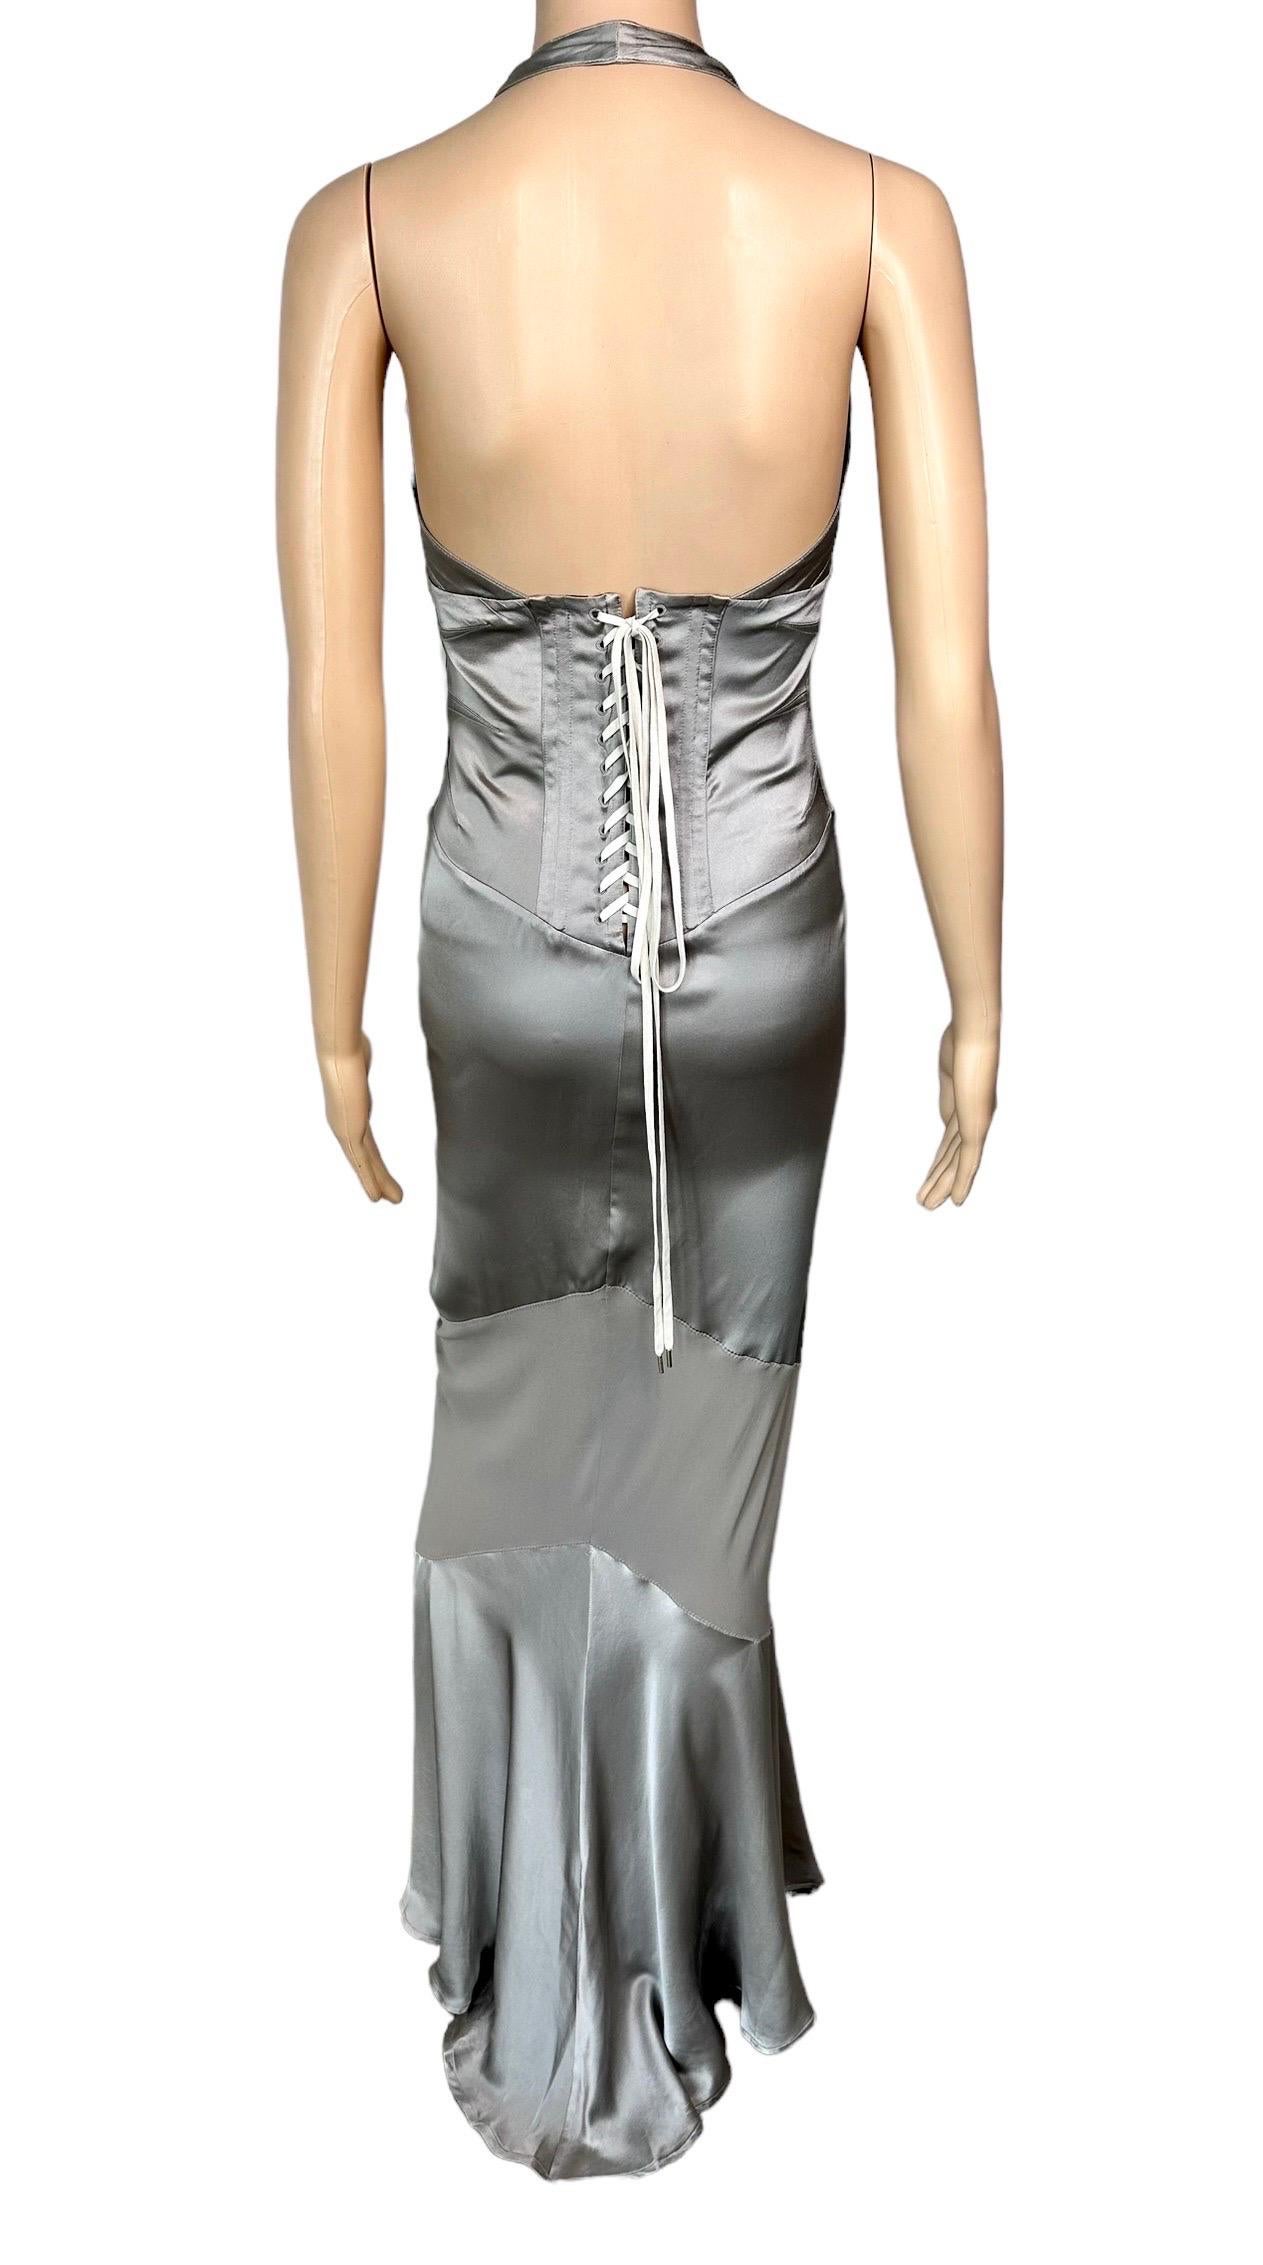 Roberto Cavalli S/S 2003 Corset Plunged Décolleté Silver Evening Dress Gown  In Good Condition For Sale In Naples, FL